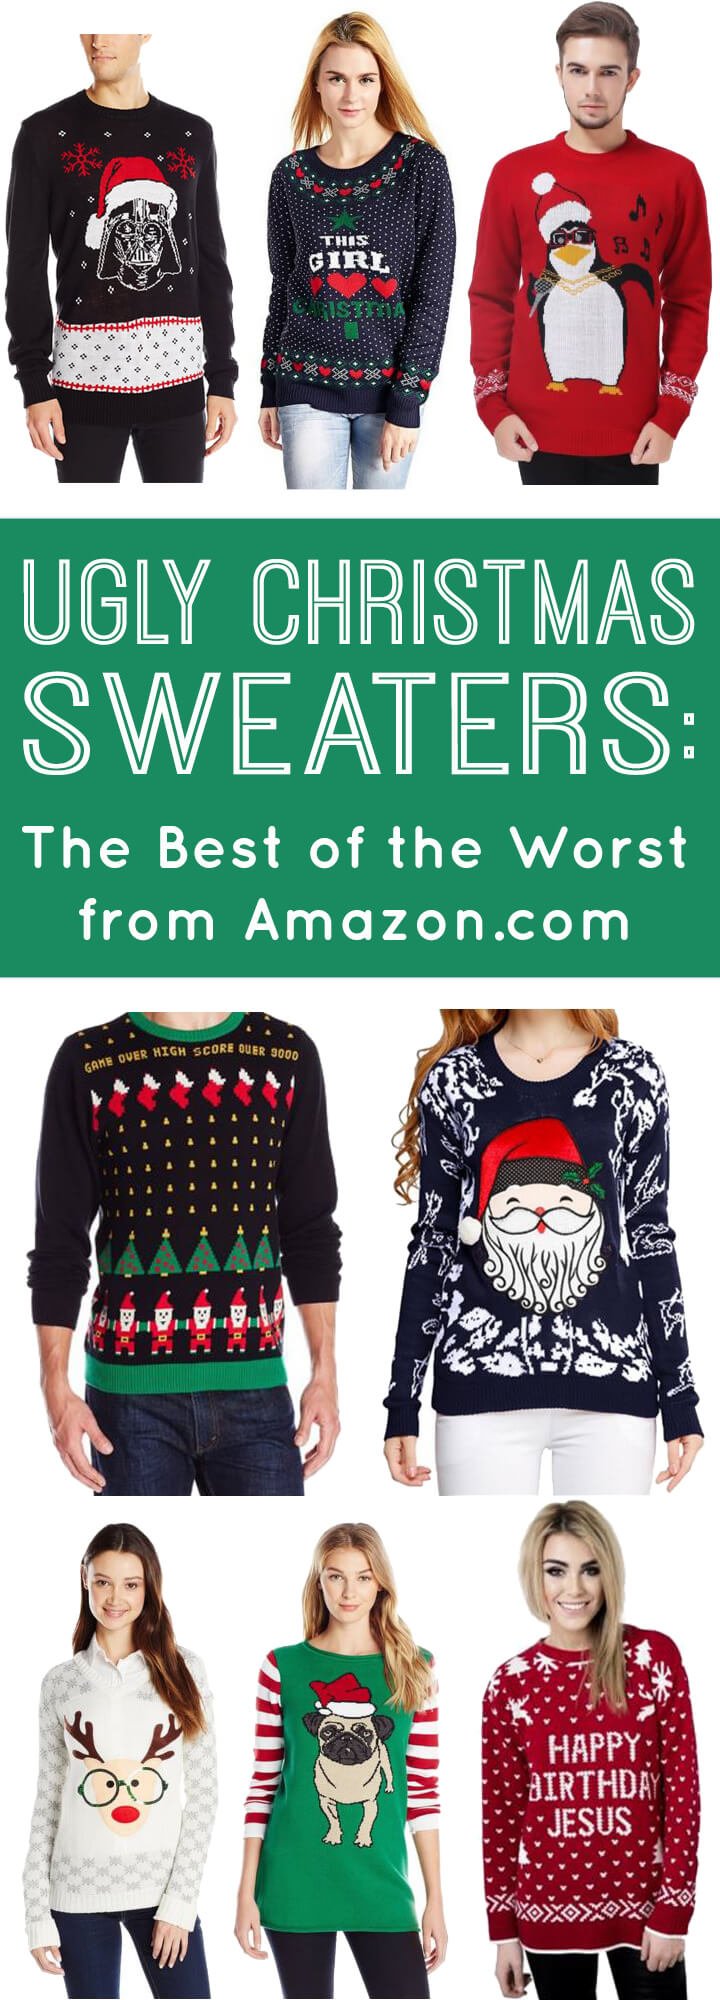 Ugly Christmas sweaters the best of the worst from amazon.com